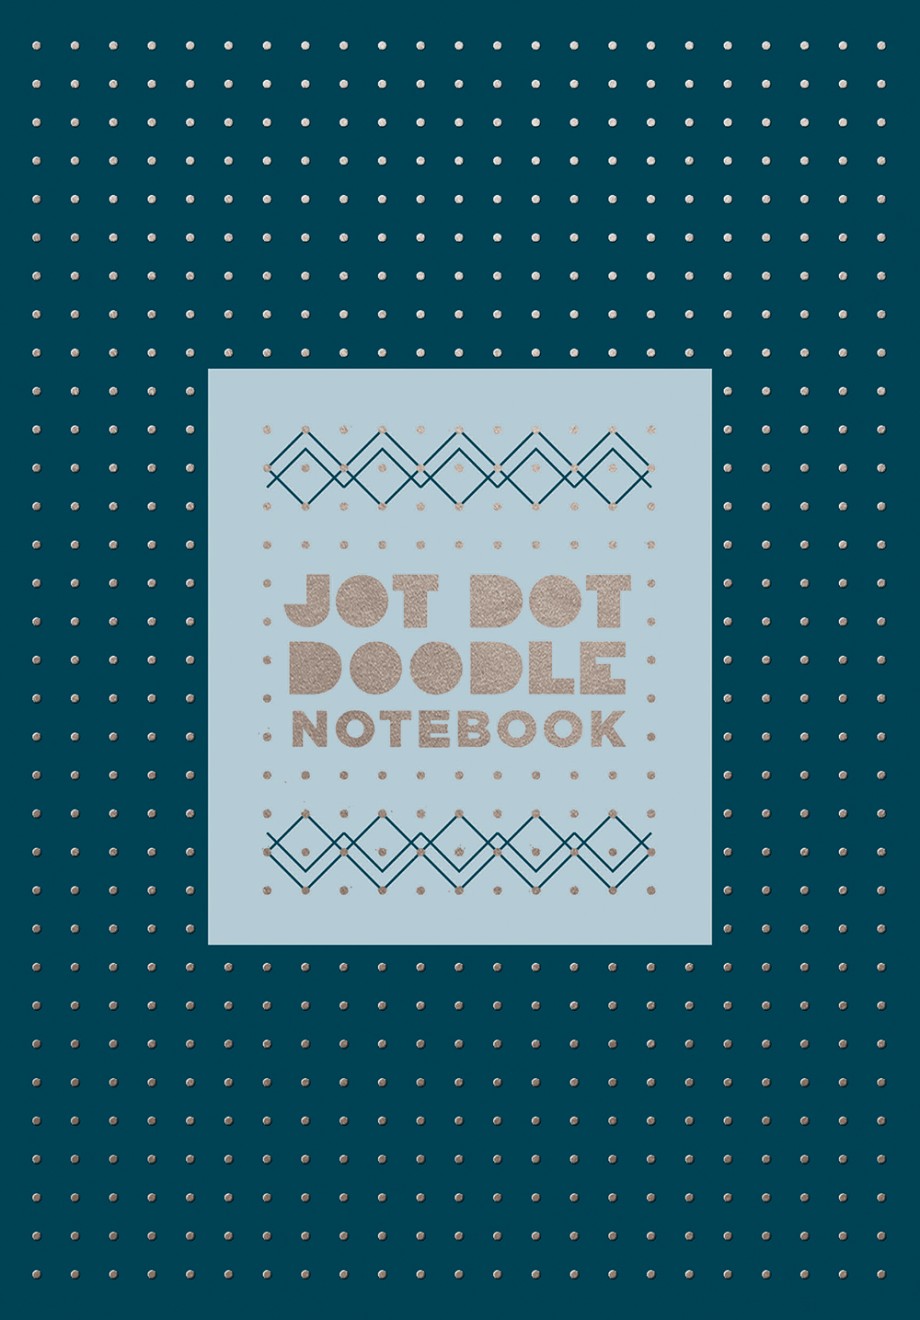 Jot Dot Doodle Notebook (Blue and Silver) 